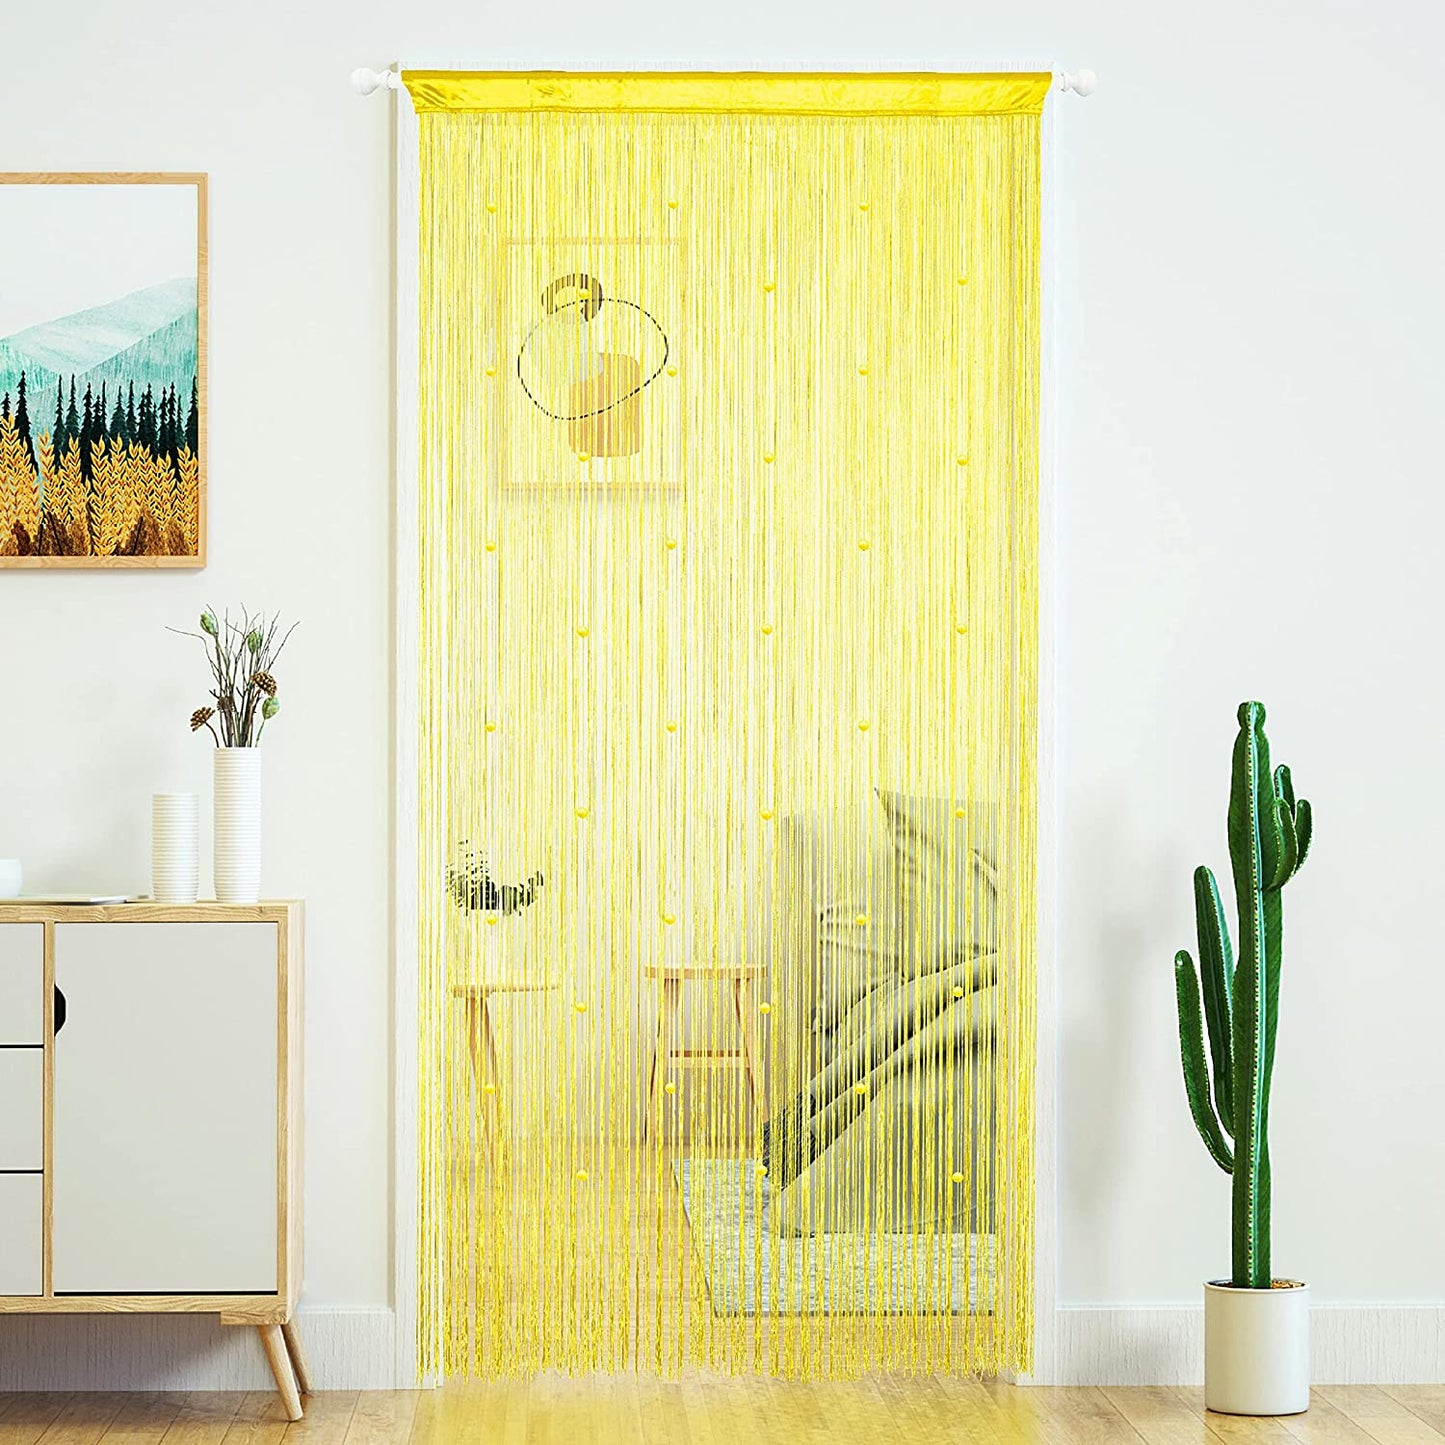 Yaoyue Beaded Curtain Door String Curtains for Doorway Tassels Beads Hanging Fringe Hippie Room Divider Window Hallway Entrance Wall Closet Bedroom Privacy Decor (39×79In/100×200Cm, Light Coffee)  YaoYue Yellow 100×200Cm 